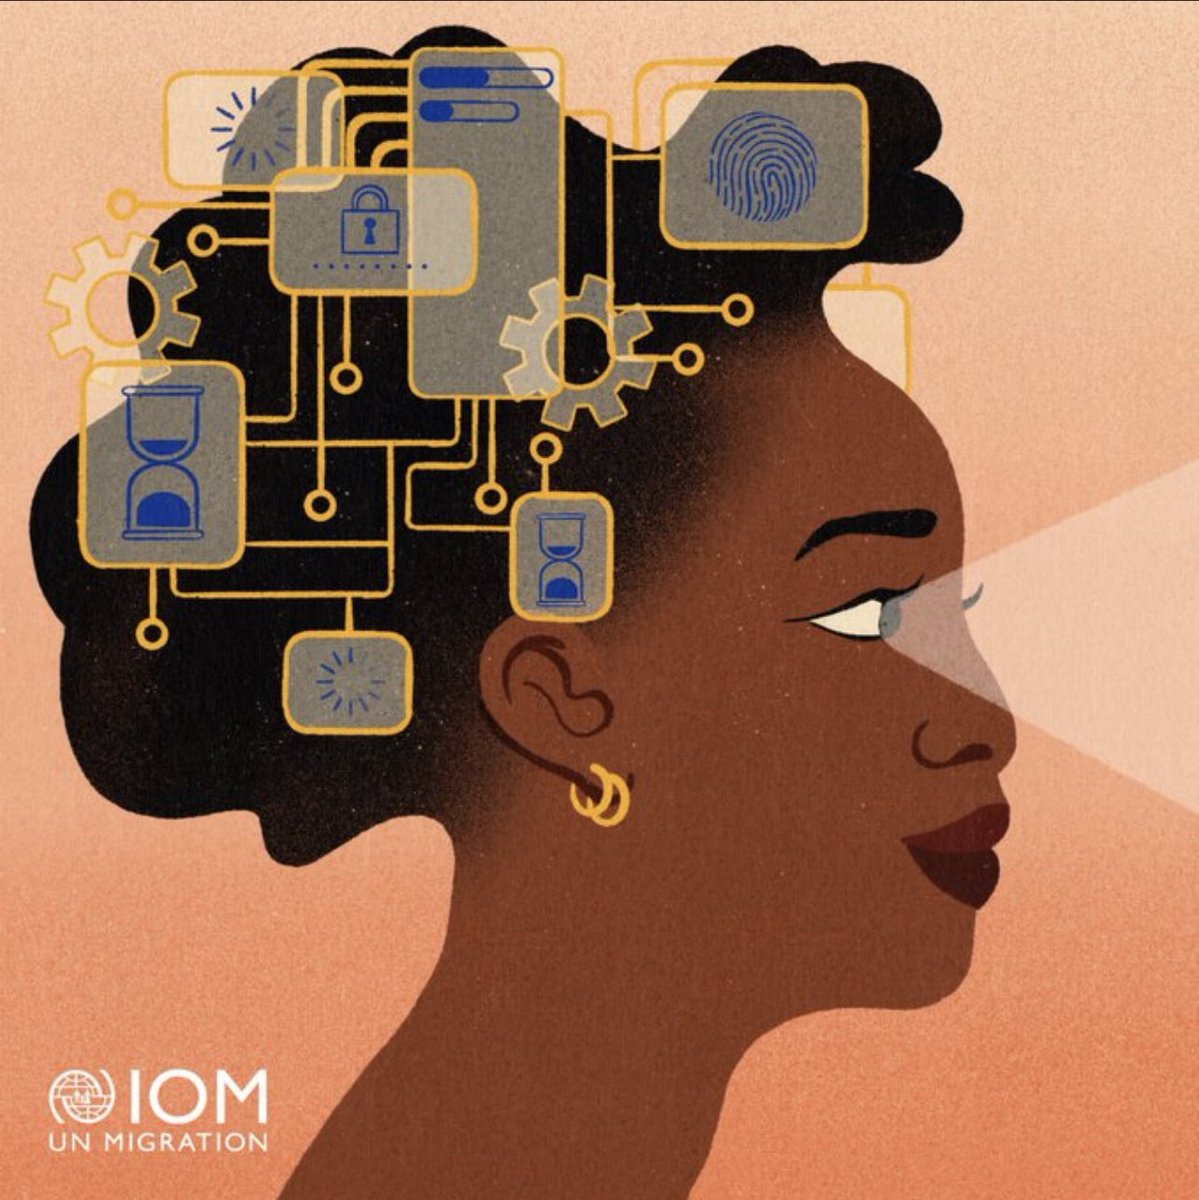 Today we celebrate #GirlsInICT! Let's ensure equal opportunities and support migrant women and girls in their innovations that contribute to the development of their communities.